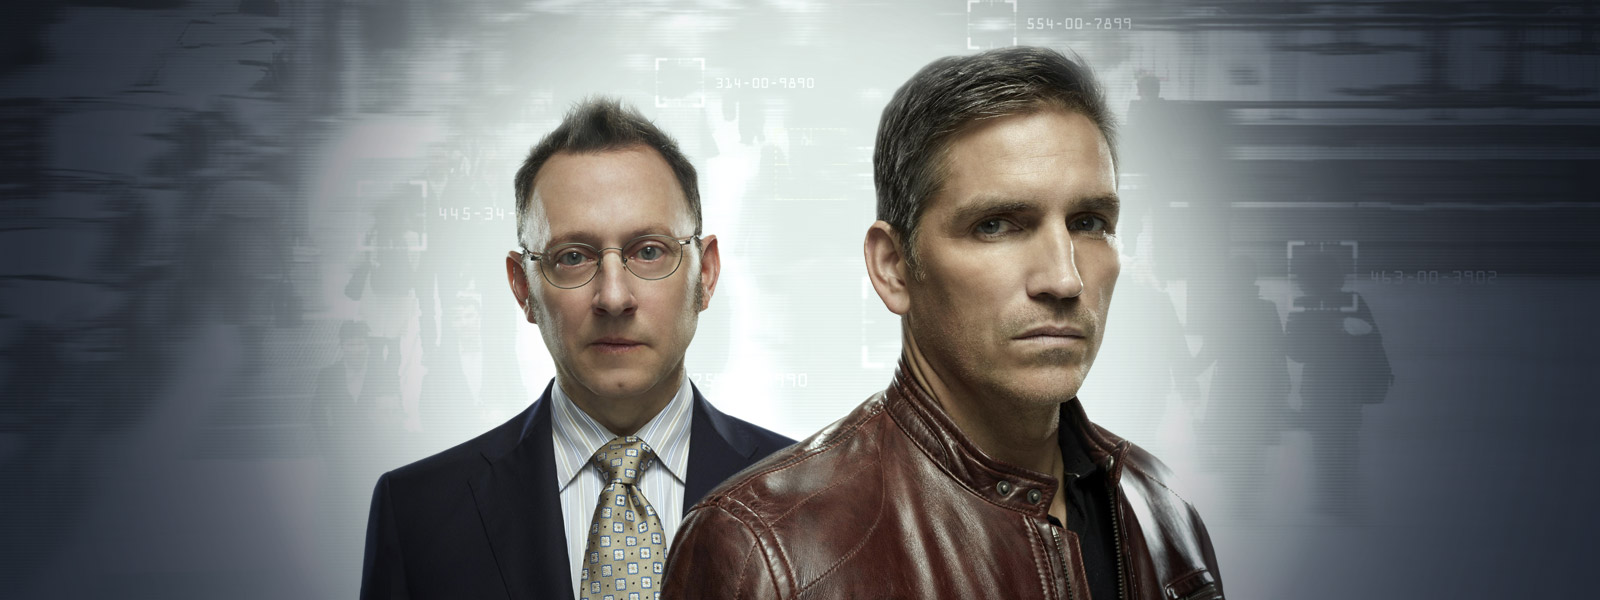 Review: Person of Interest 4.01 – “Panopticon”